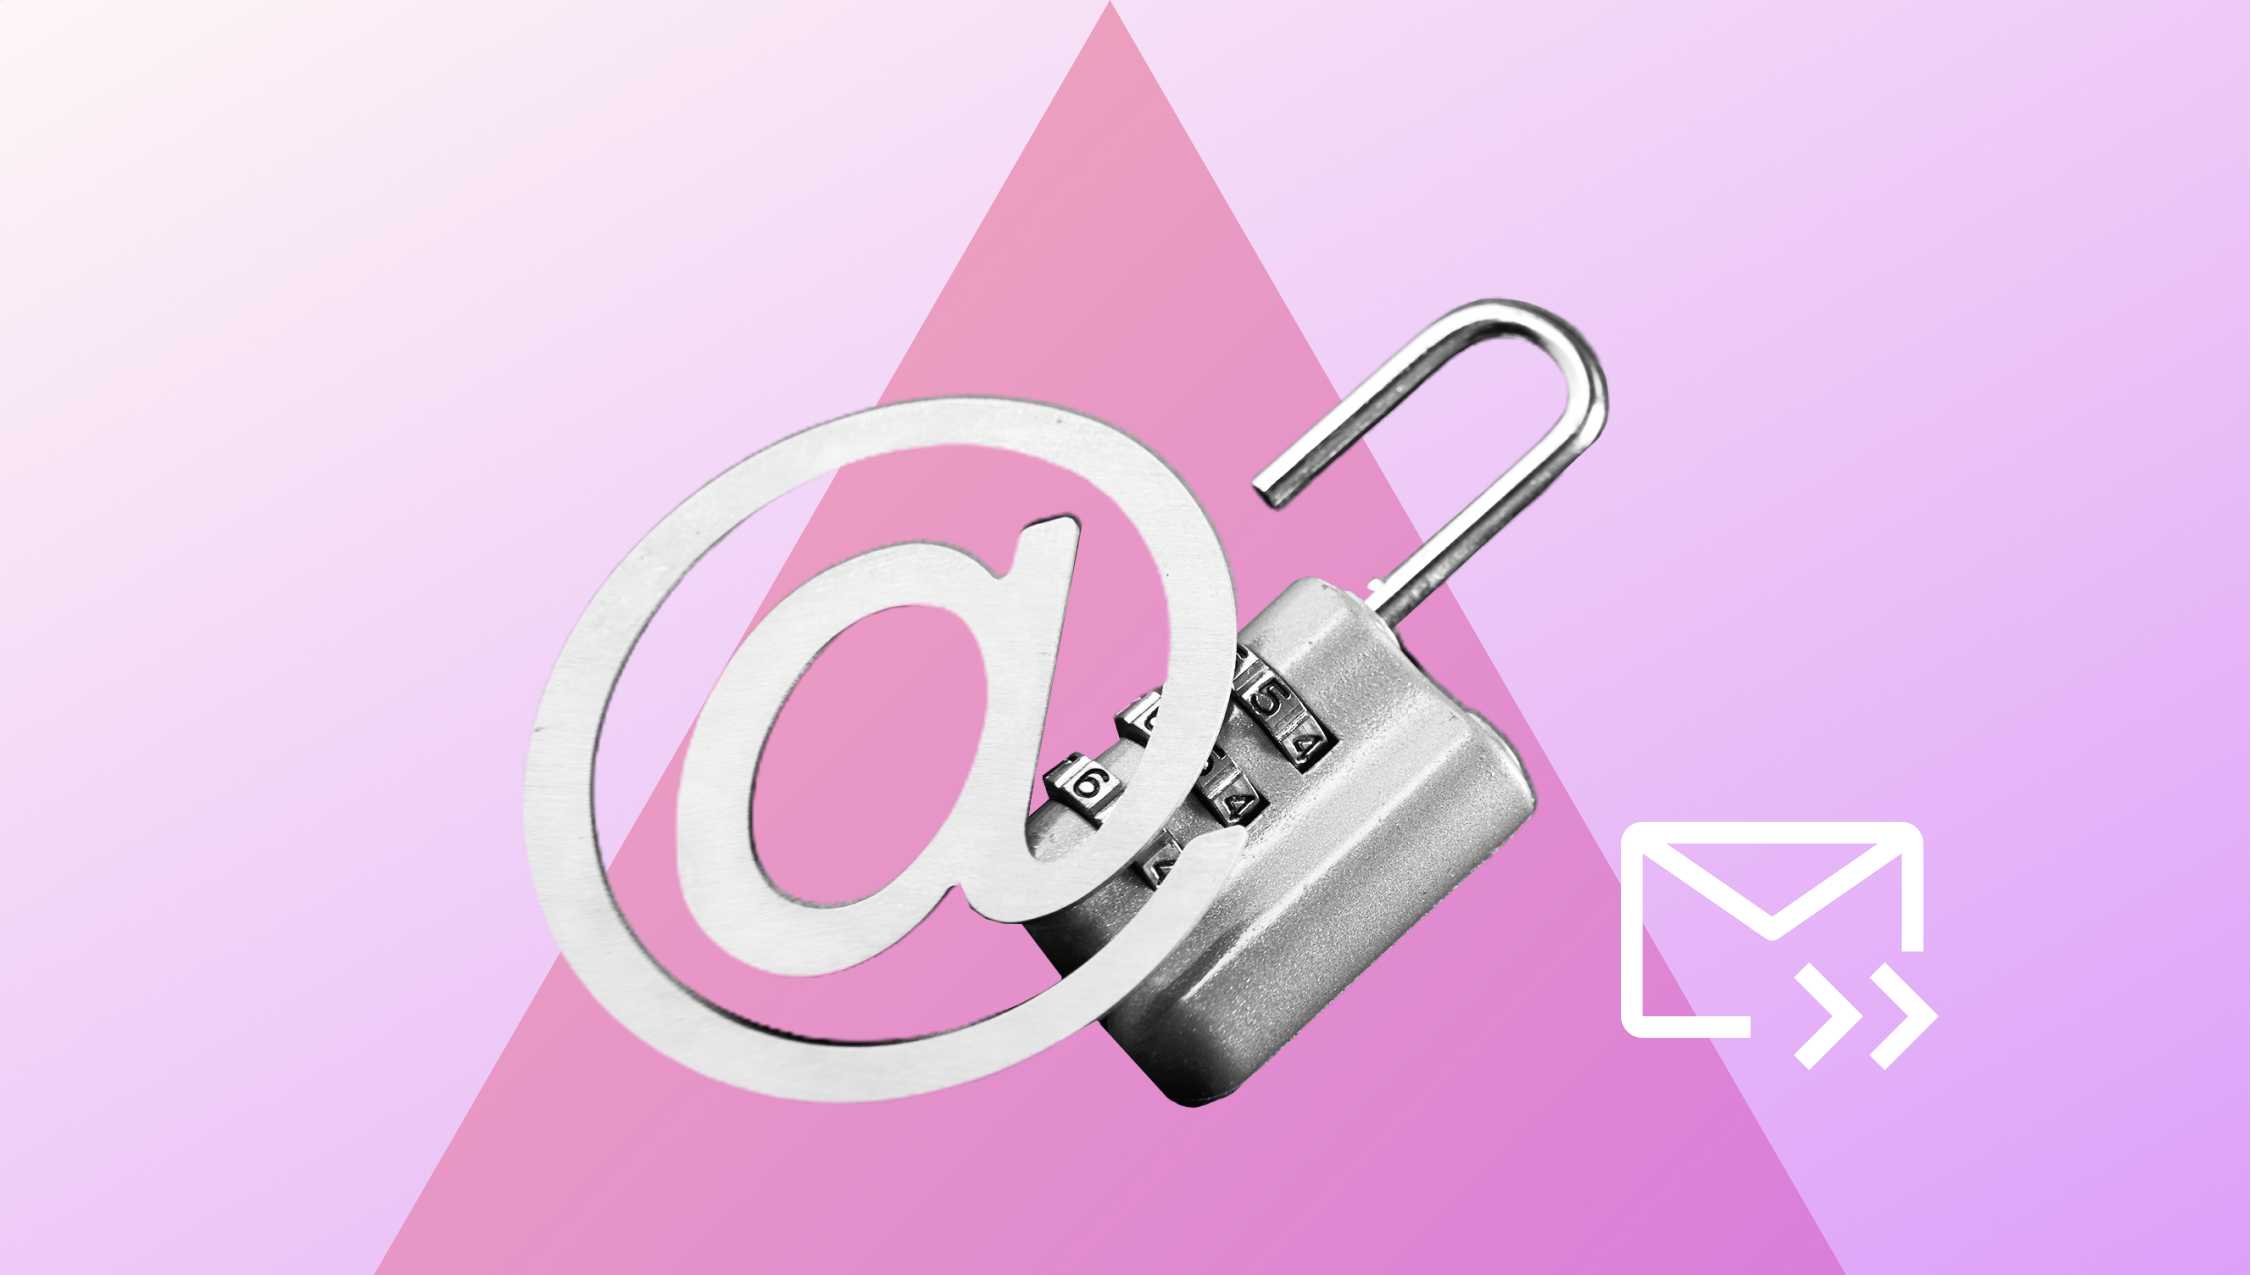 Combination lock with an at sign and an e-mail icon in front of a pink triangle